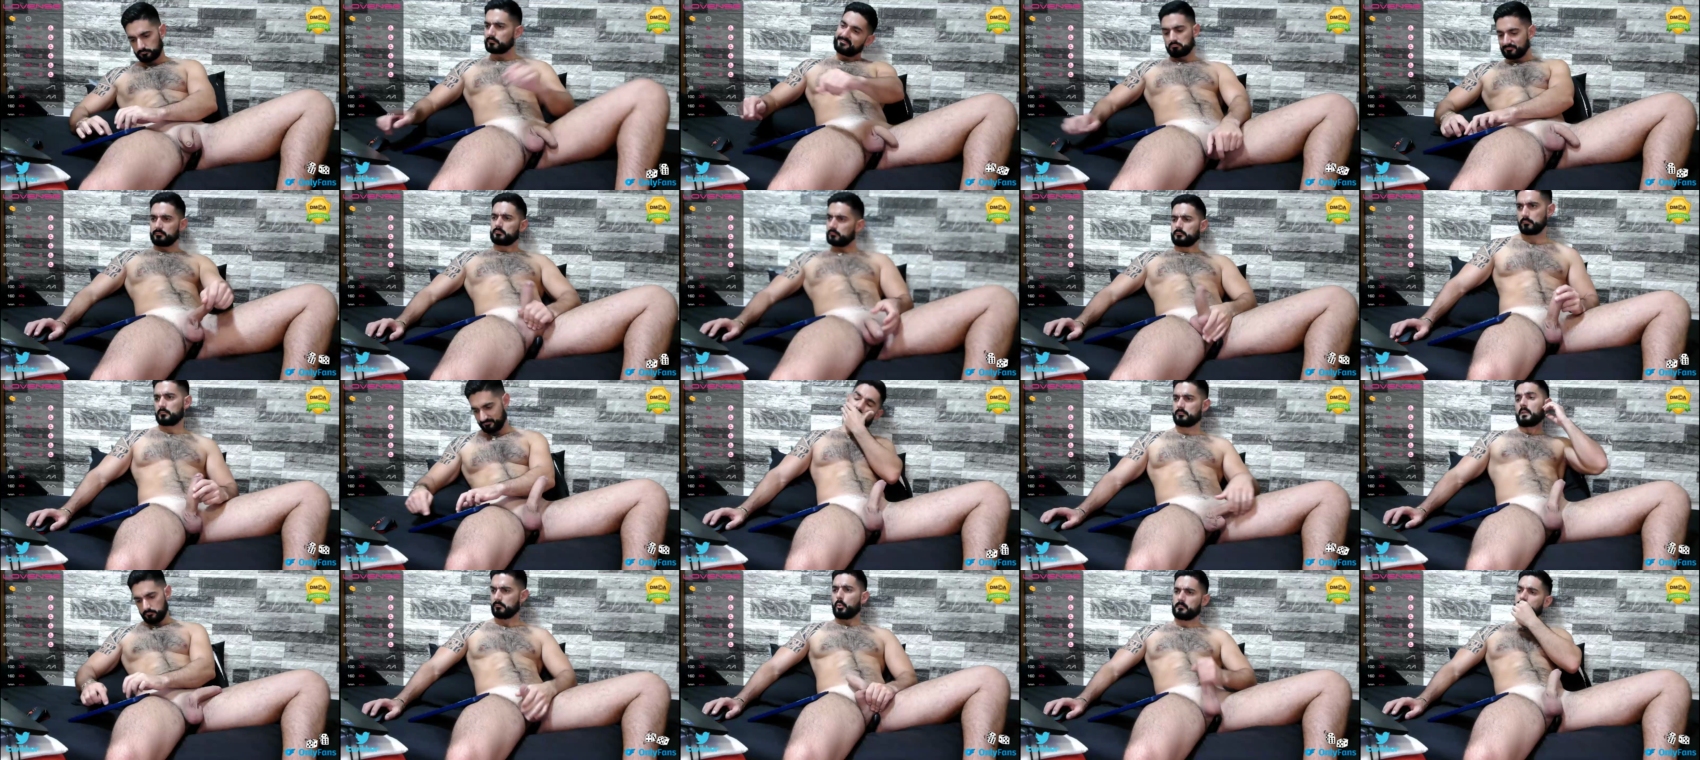 ricky_muscle_1993 bicurious Webcam SHOW @ Chaturbate 11-08-2023